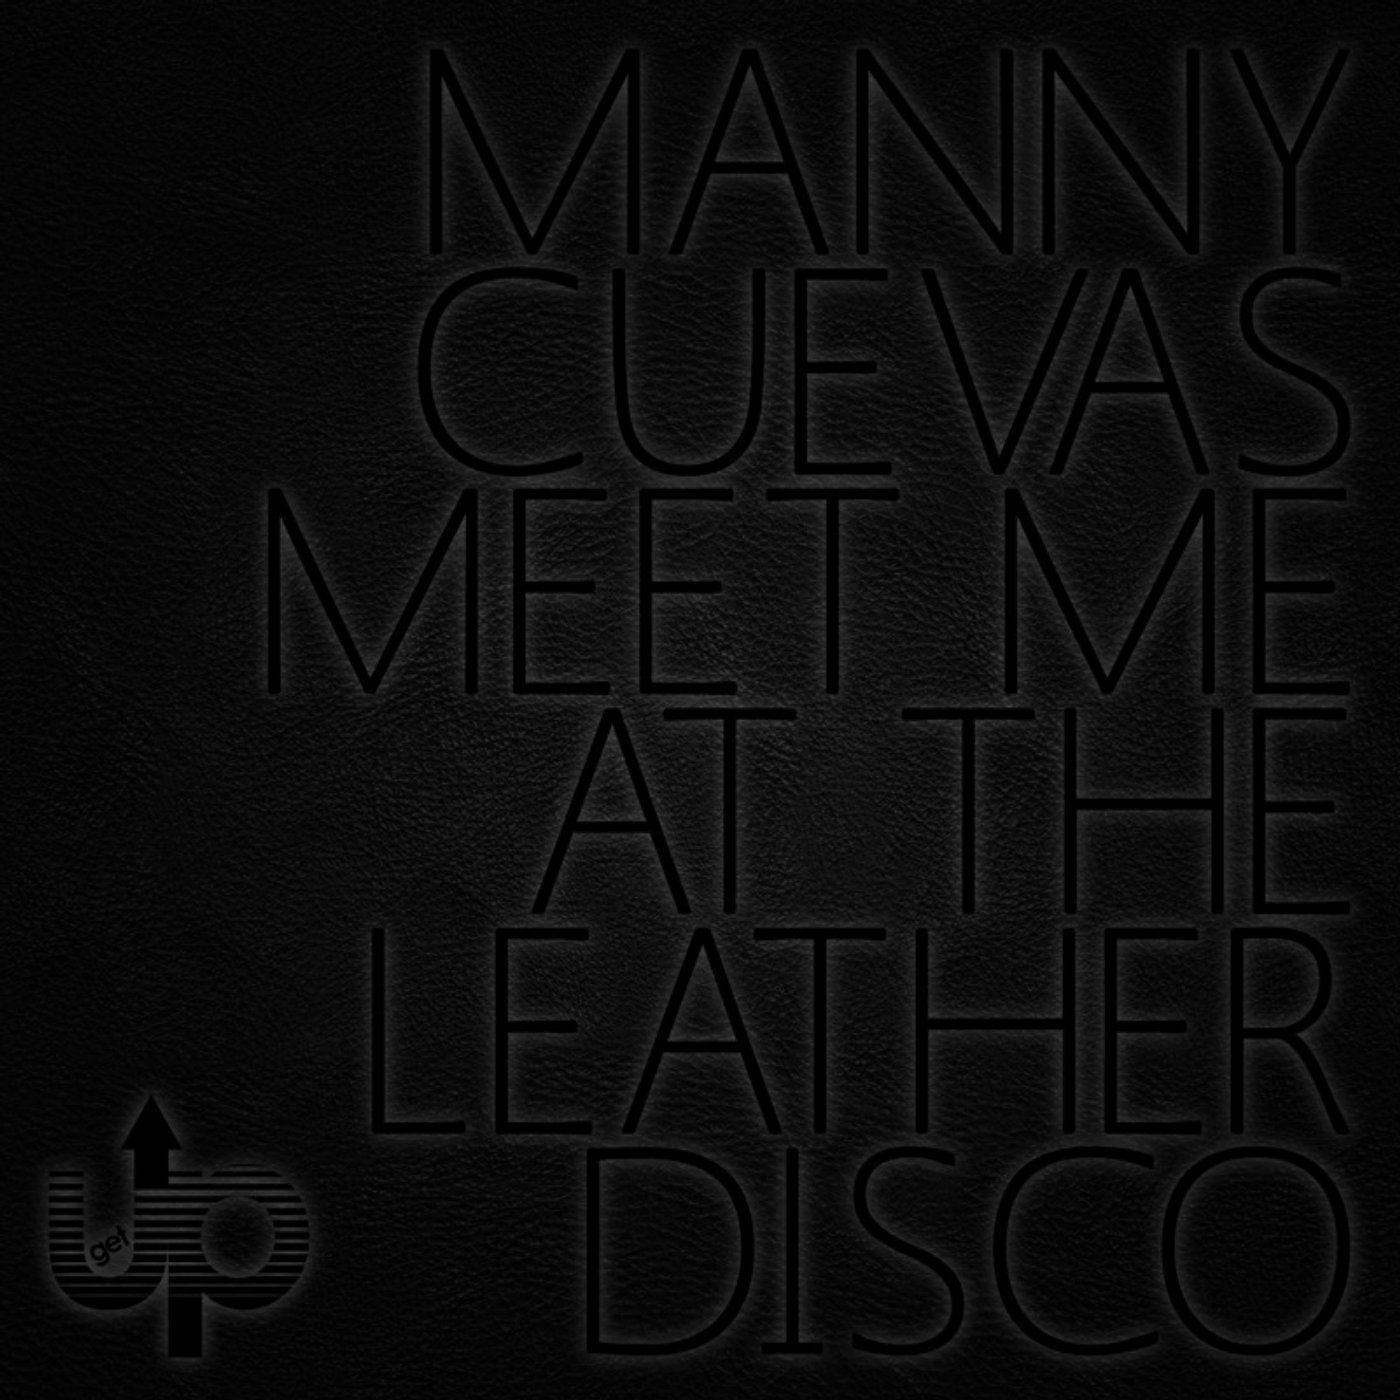 Meet Me at the Leather Disco EP